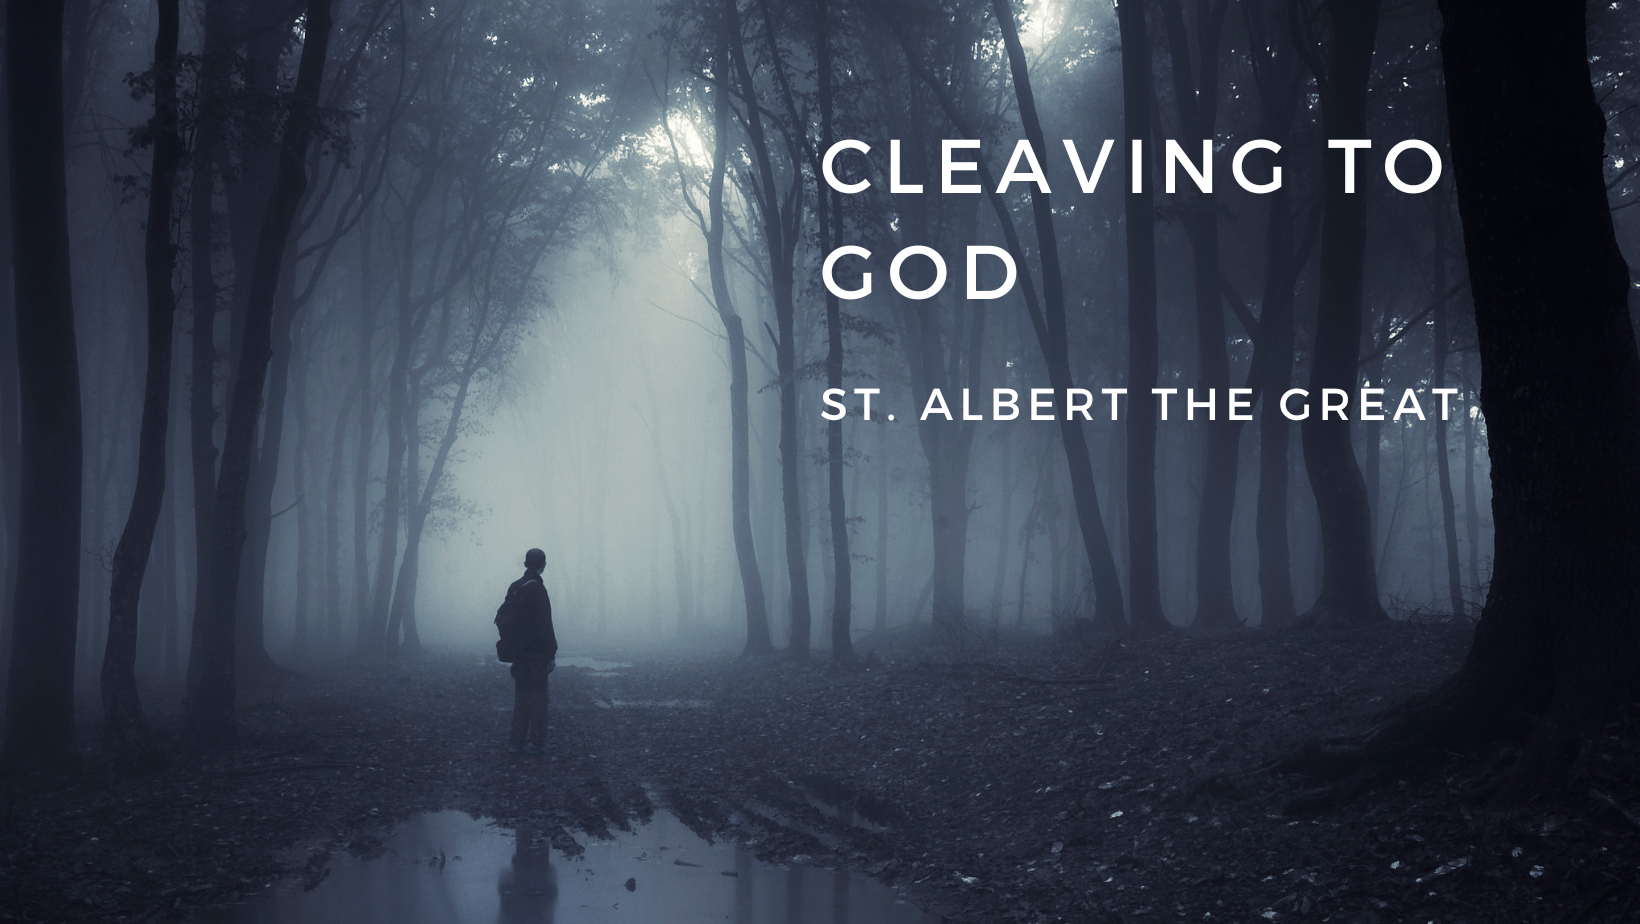 Cleaving to God by St. Albert the Great